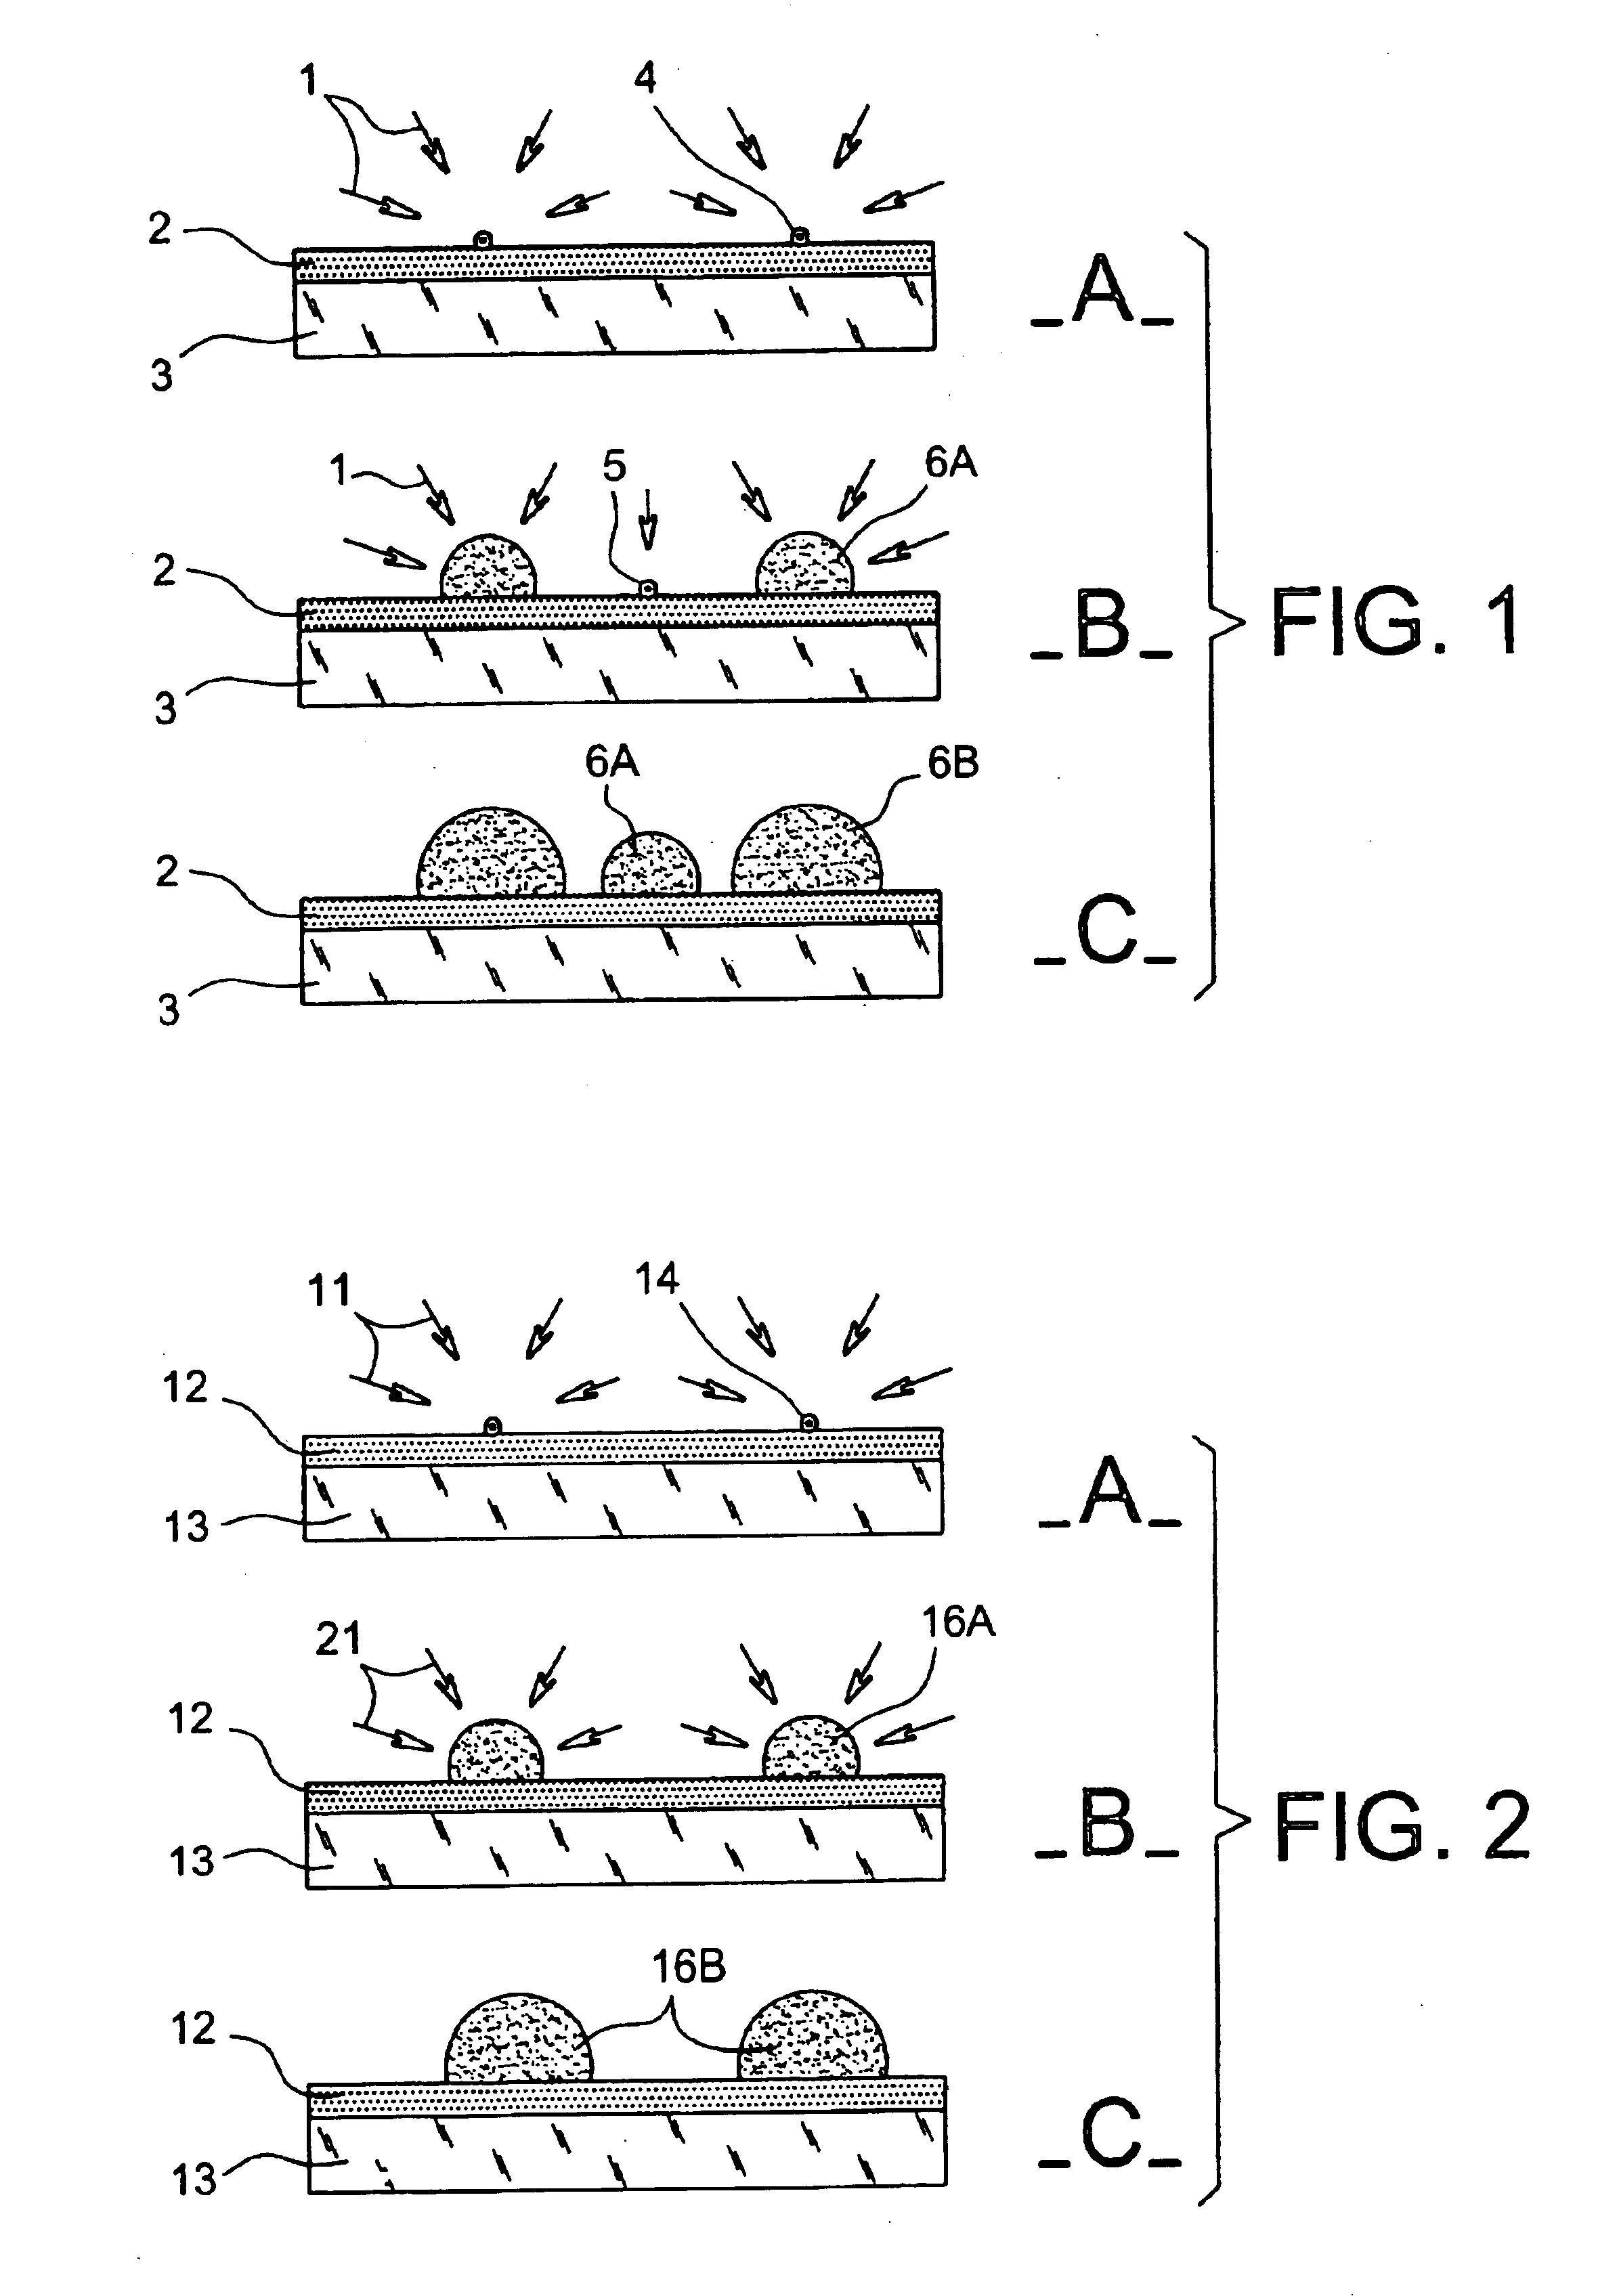 Method for forming, by CVD, nanostructures of semi-conductor material of homogenous and controlled size on dielectric material